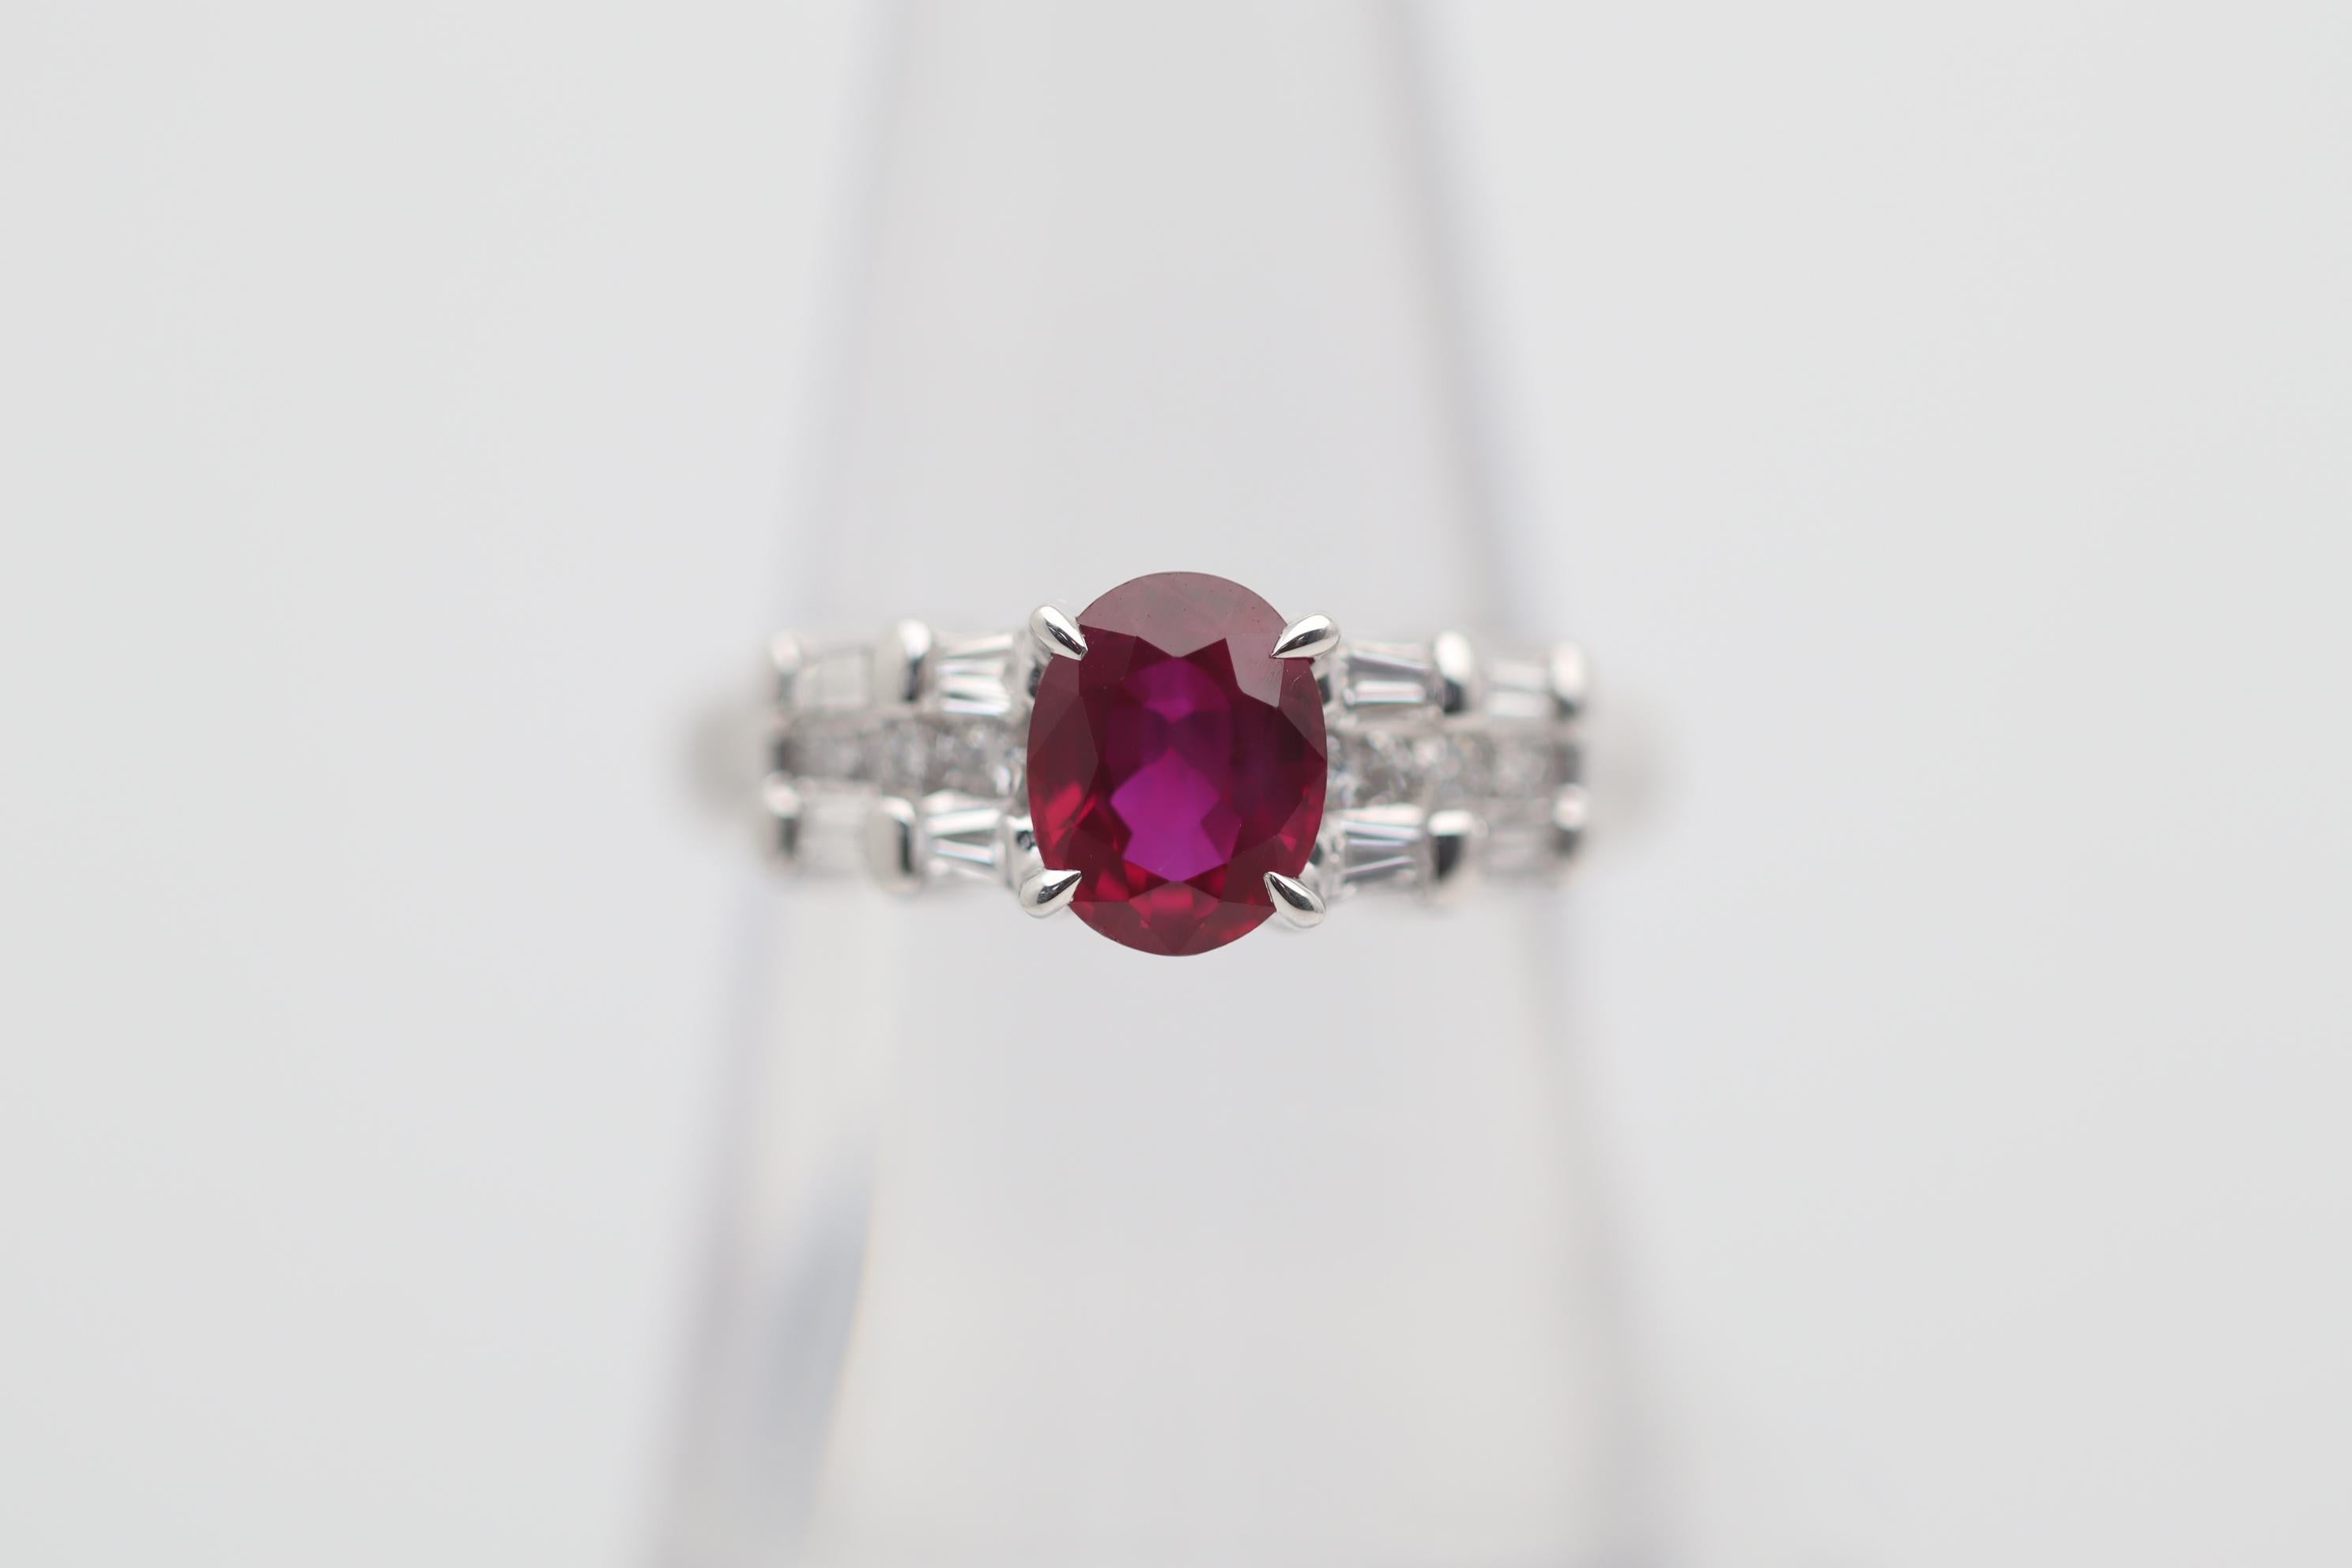 A lovely ring featuring a fine Burmese ruby weighing 1.46 carats. It has a rich vibrant red color and is certified from the GIA as natural with a Burmese origin. It is complemented by 0.43 carats of round brilliant and baguette-cut diamonds set on